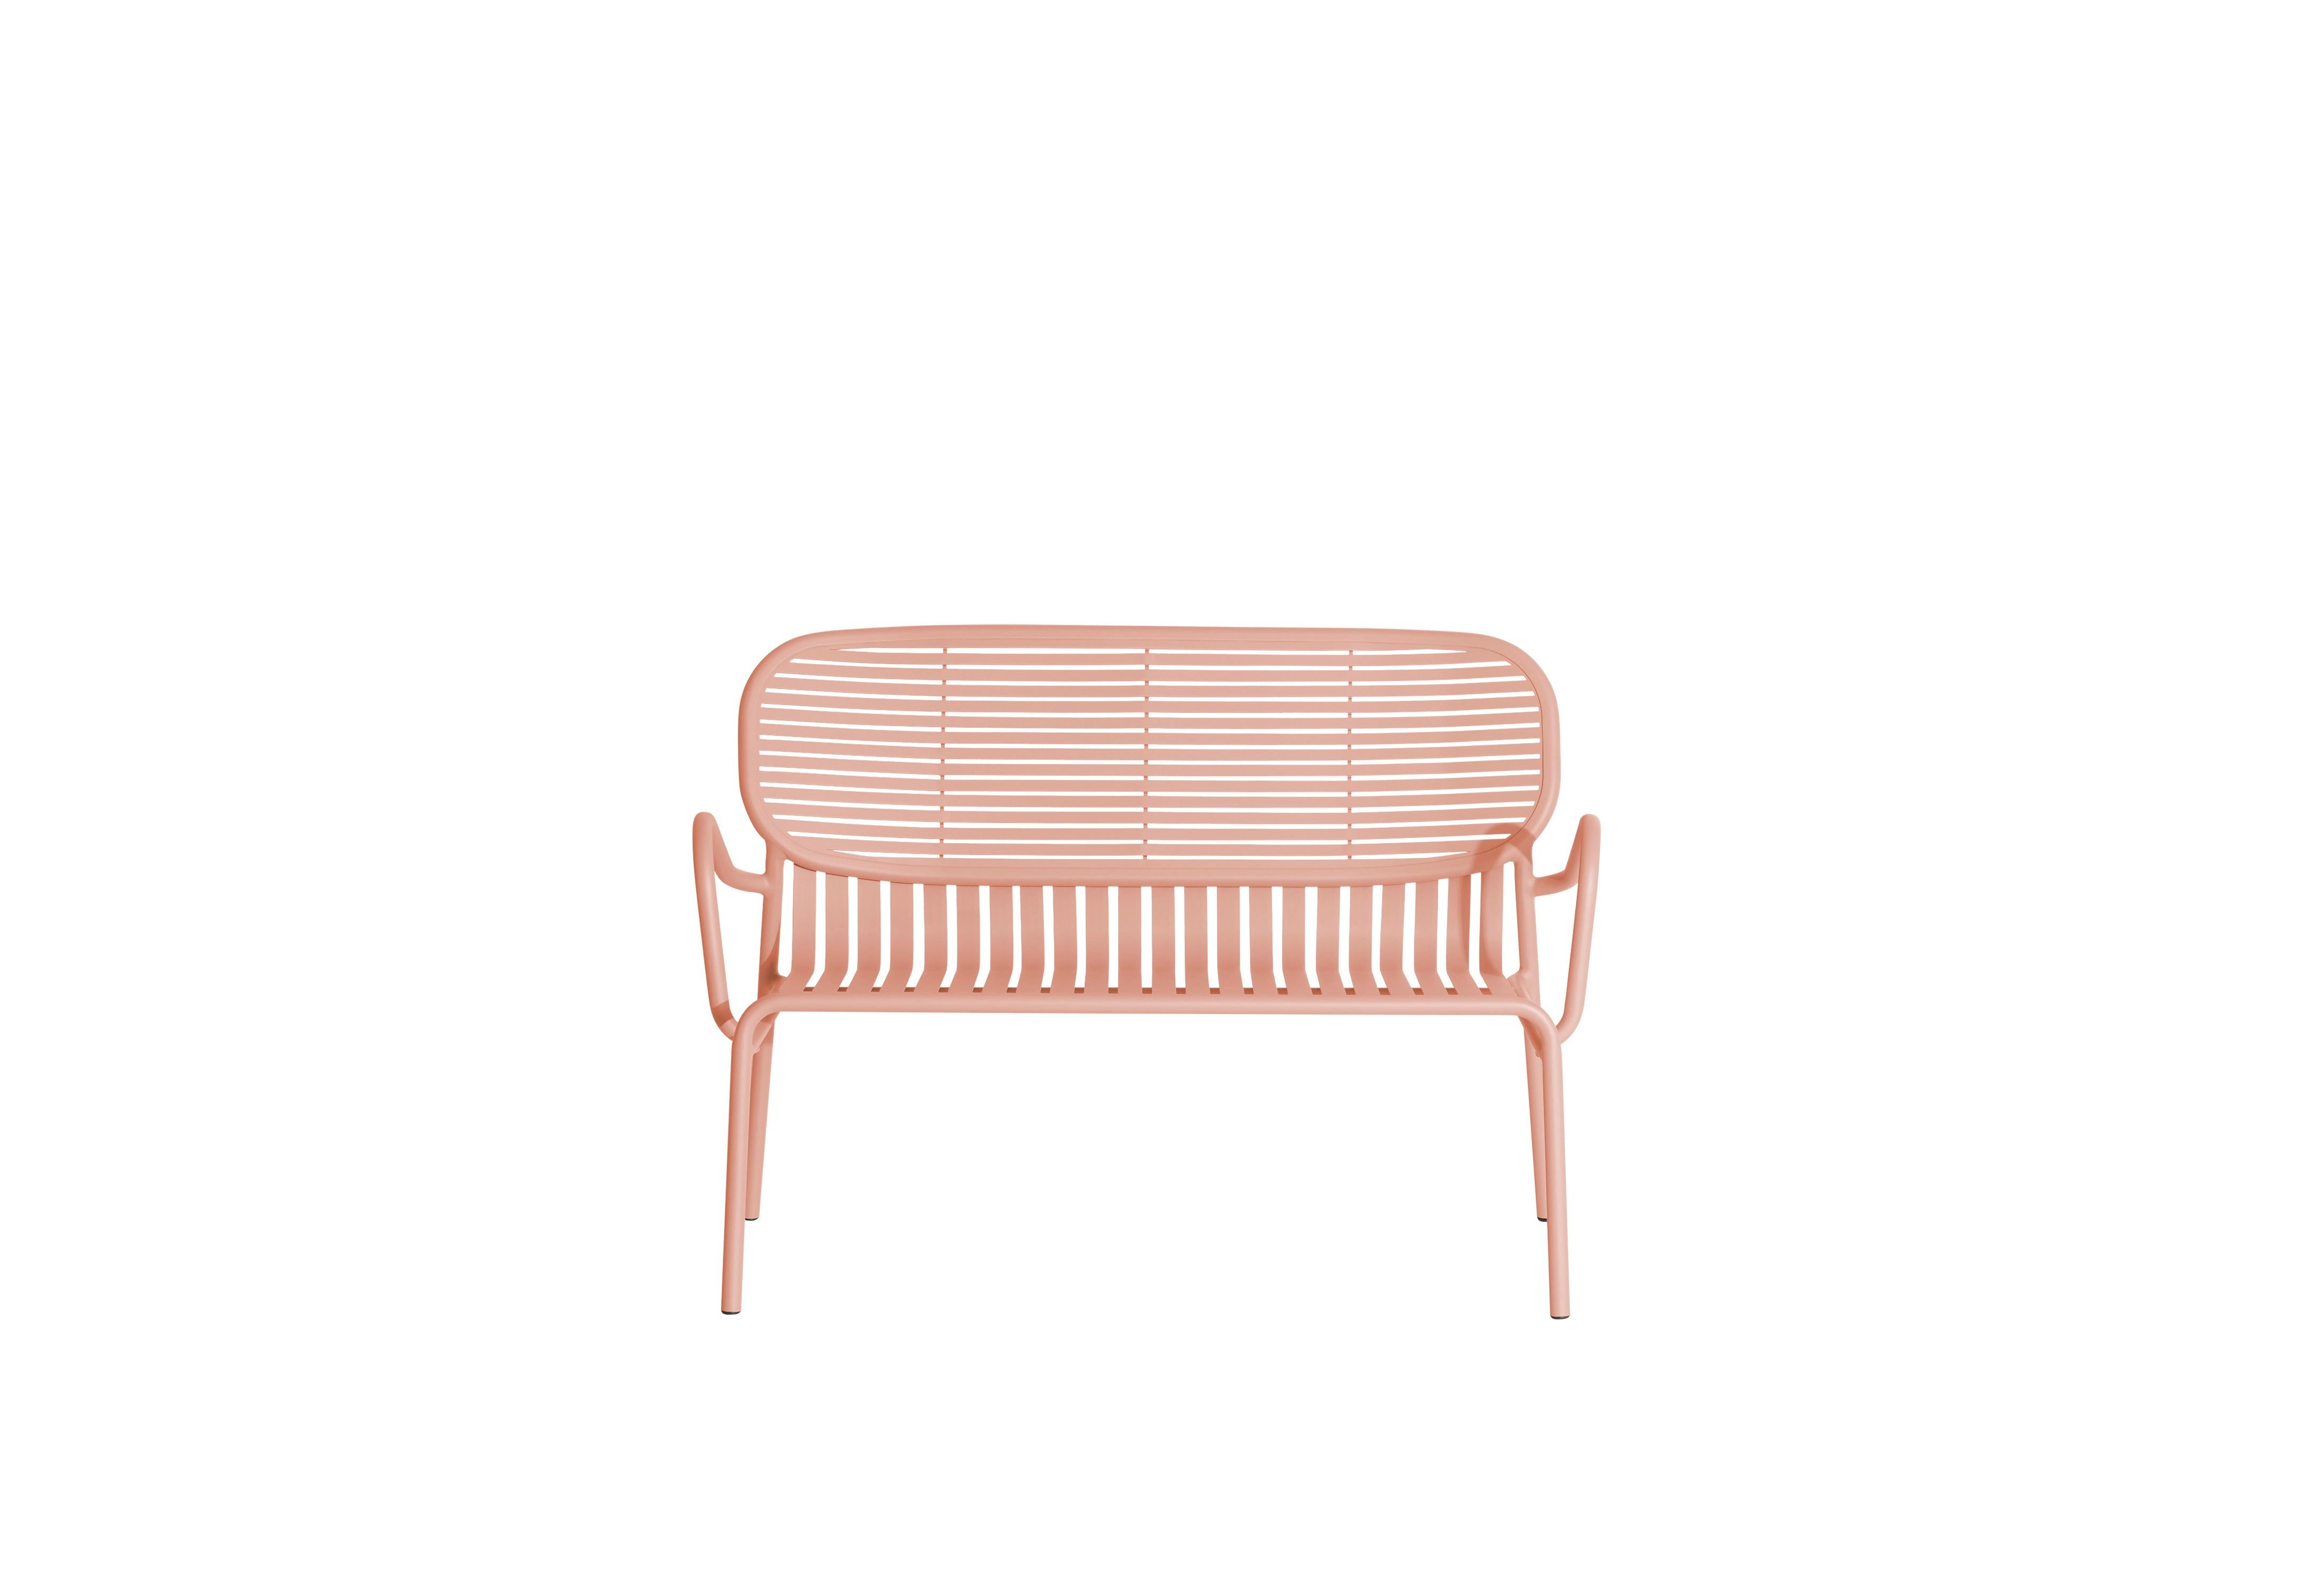 Petite Friture Week-End Sofa in Blush Aluminium by Studio BrichetZiegler, 2017

The week-end collection is a full range of outdoor furniture, in aluminium grained epoxy paint, matt finish, that includes 18 functions and 8 colours for the retail